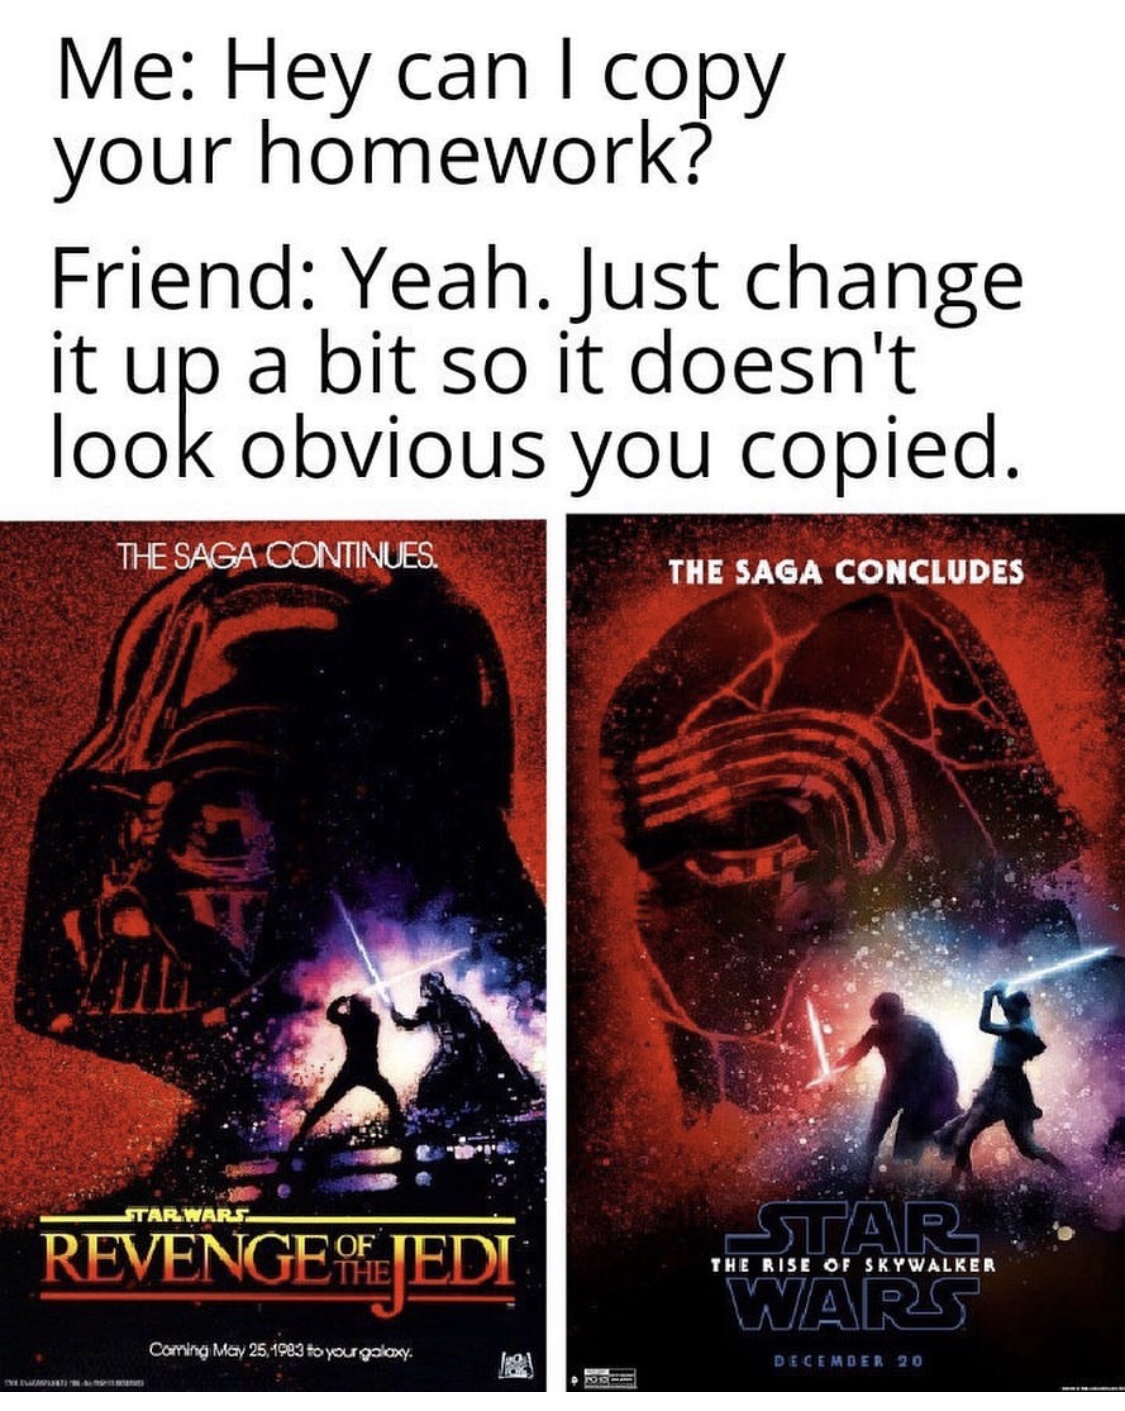 rise of skywalker memes - Me Hey can I copy your homework? Friend Yeah. Just change it up a bit so it doesn't look obvious you copied. The Saga Continues The Saga Concludes Star Wars Revengea Stars Wars Tee Rise Of Skywalker Corging Decenie 10